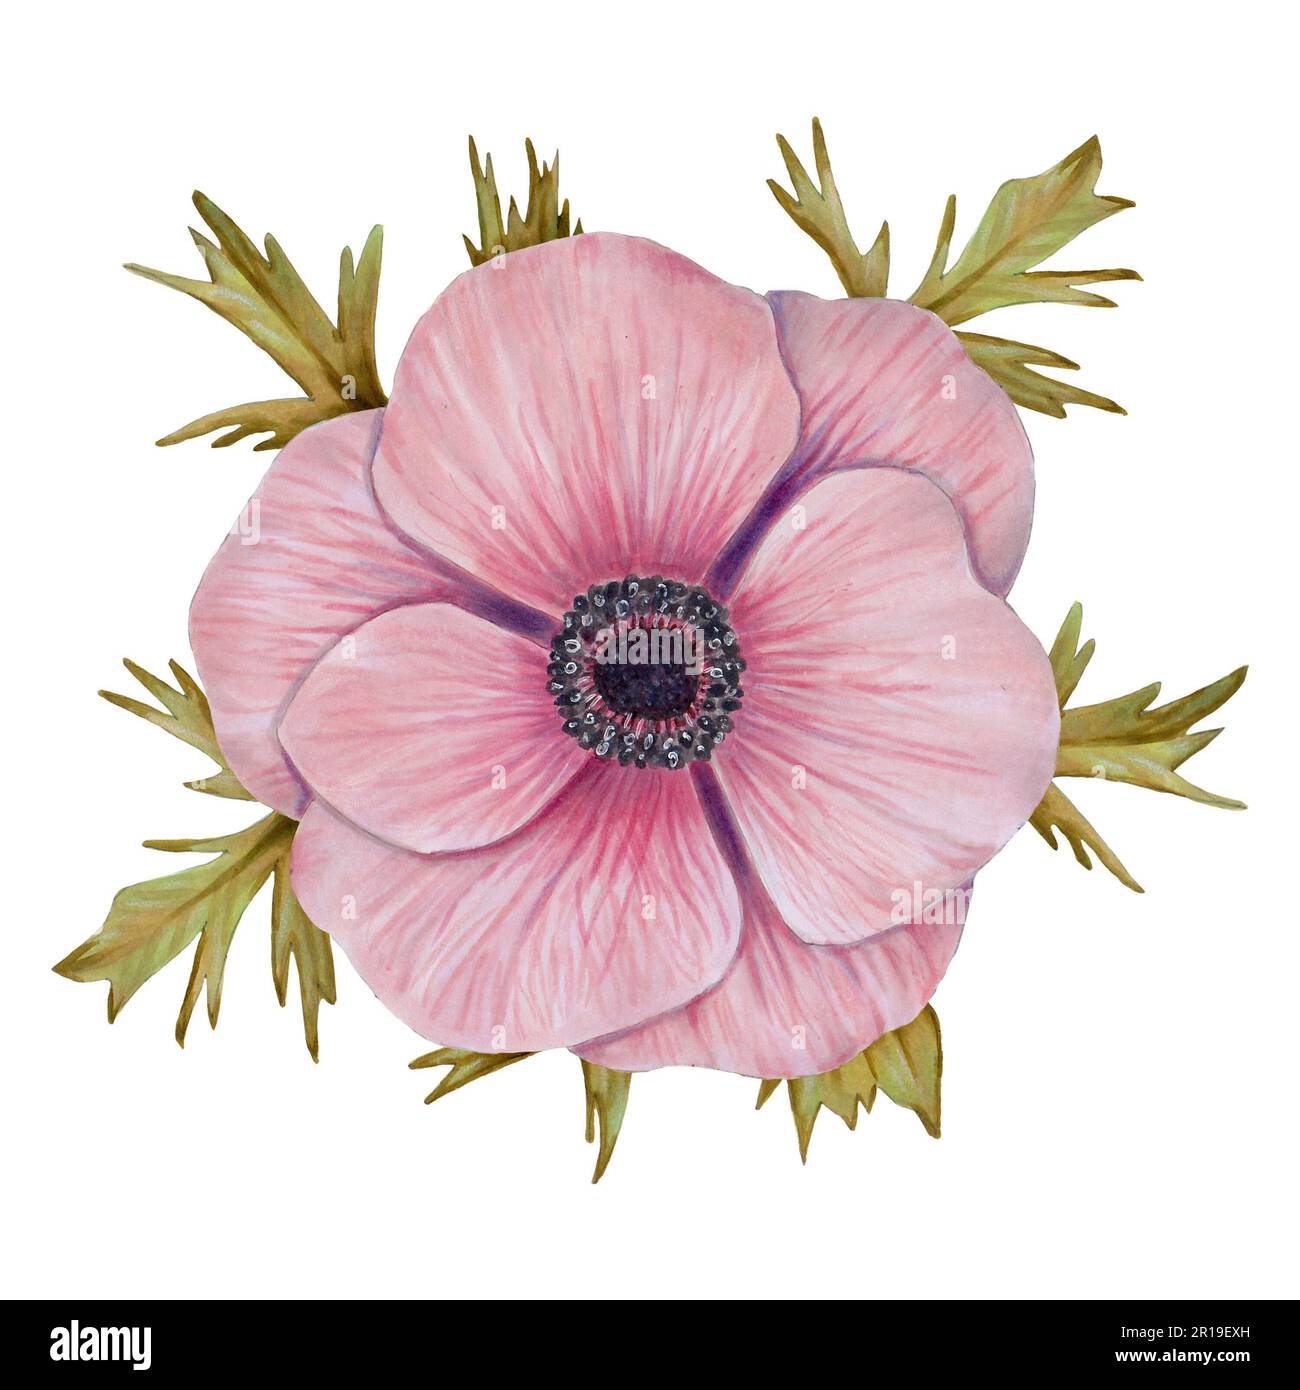 Gently pink anemone with anemone leaves. Suitable for wedding invitations, postcard decoration. Stock Photo